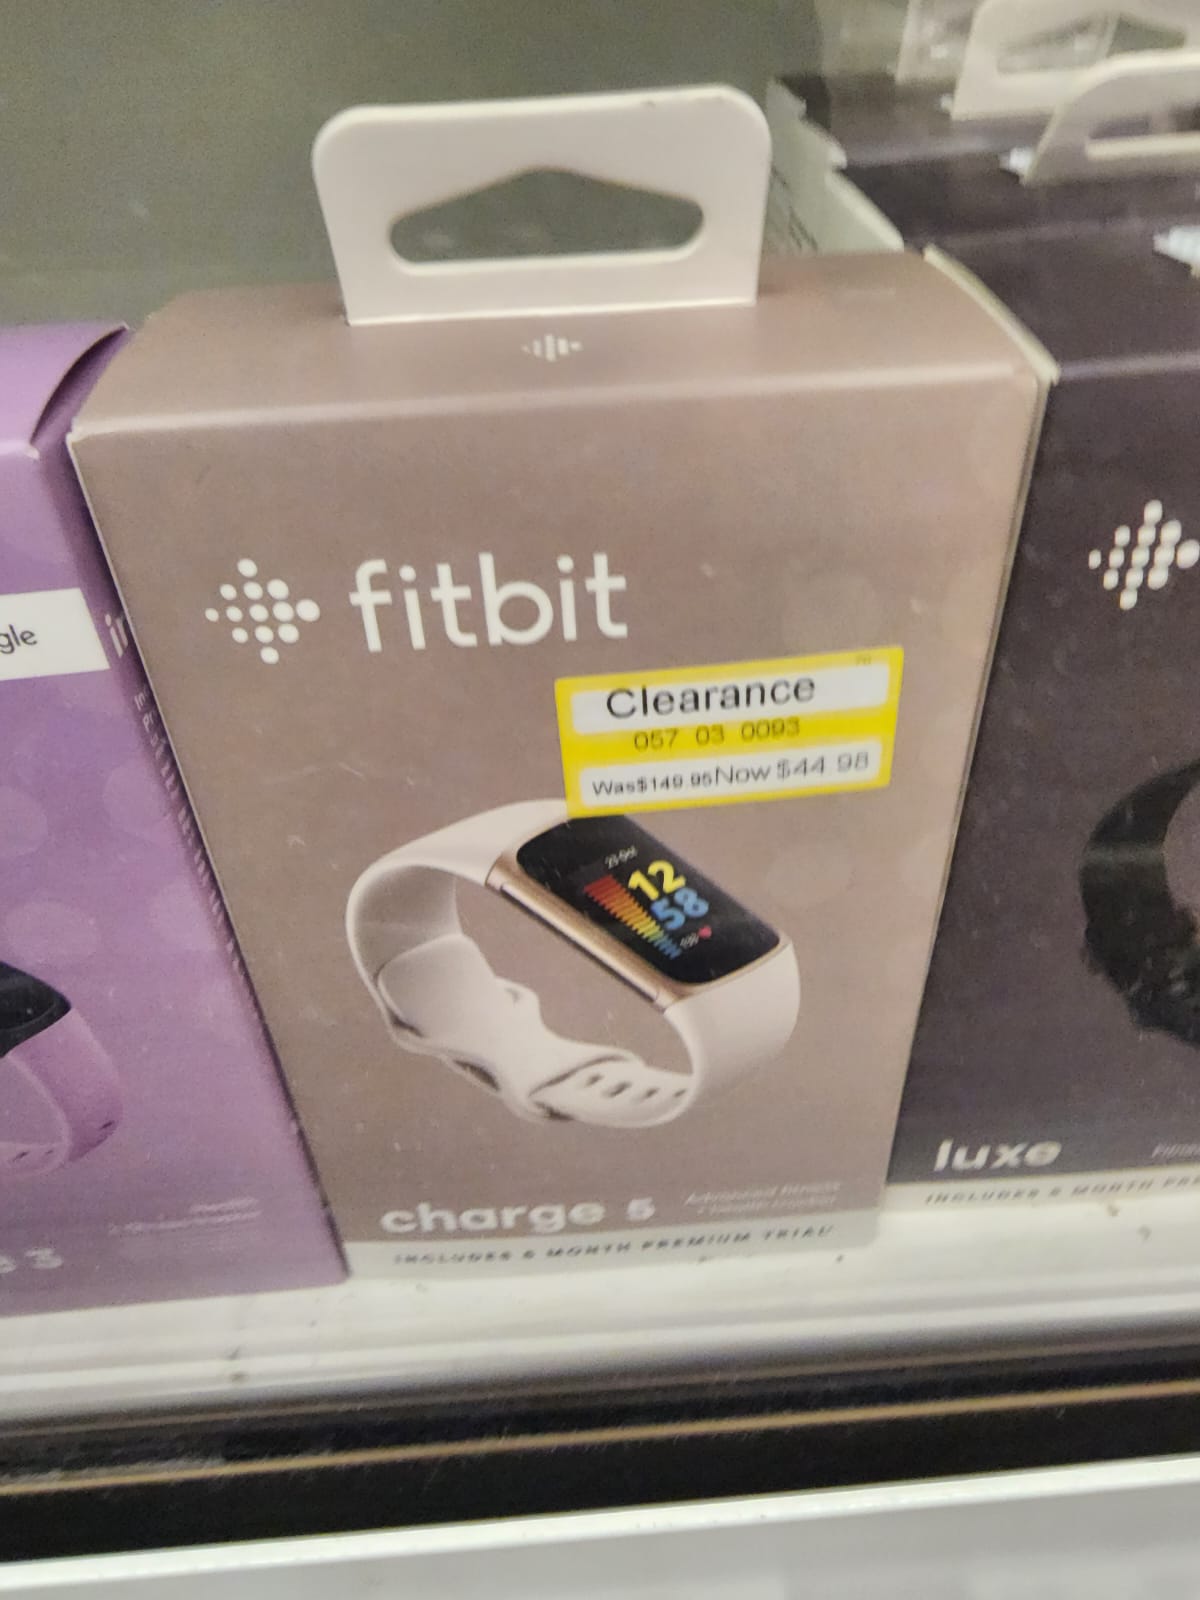 YMMV Target in store clearance 70% Off Fitbit charge 5 $44.95